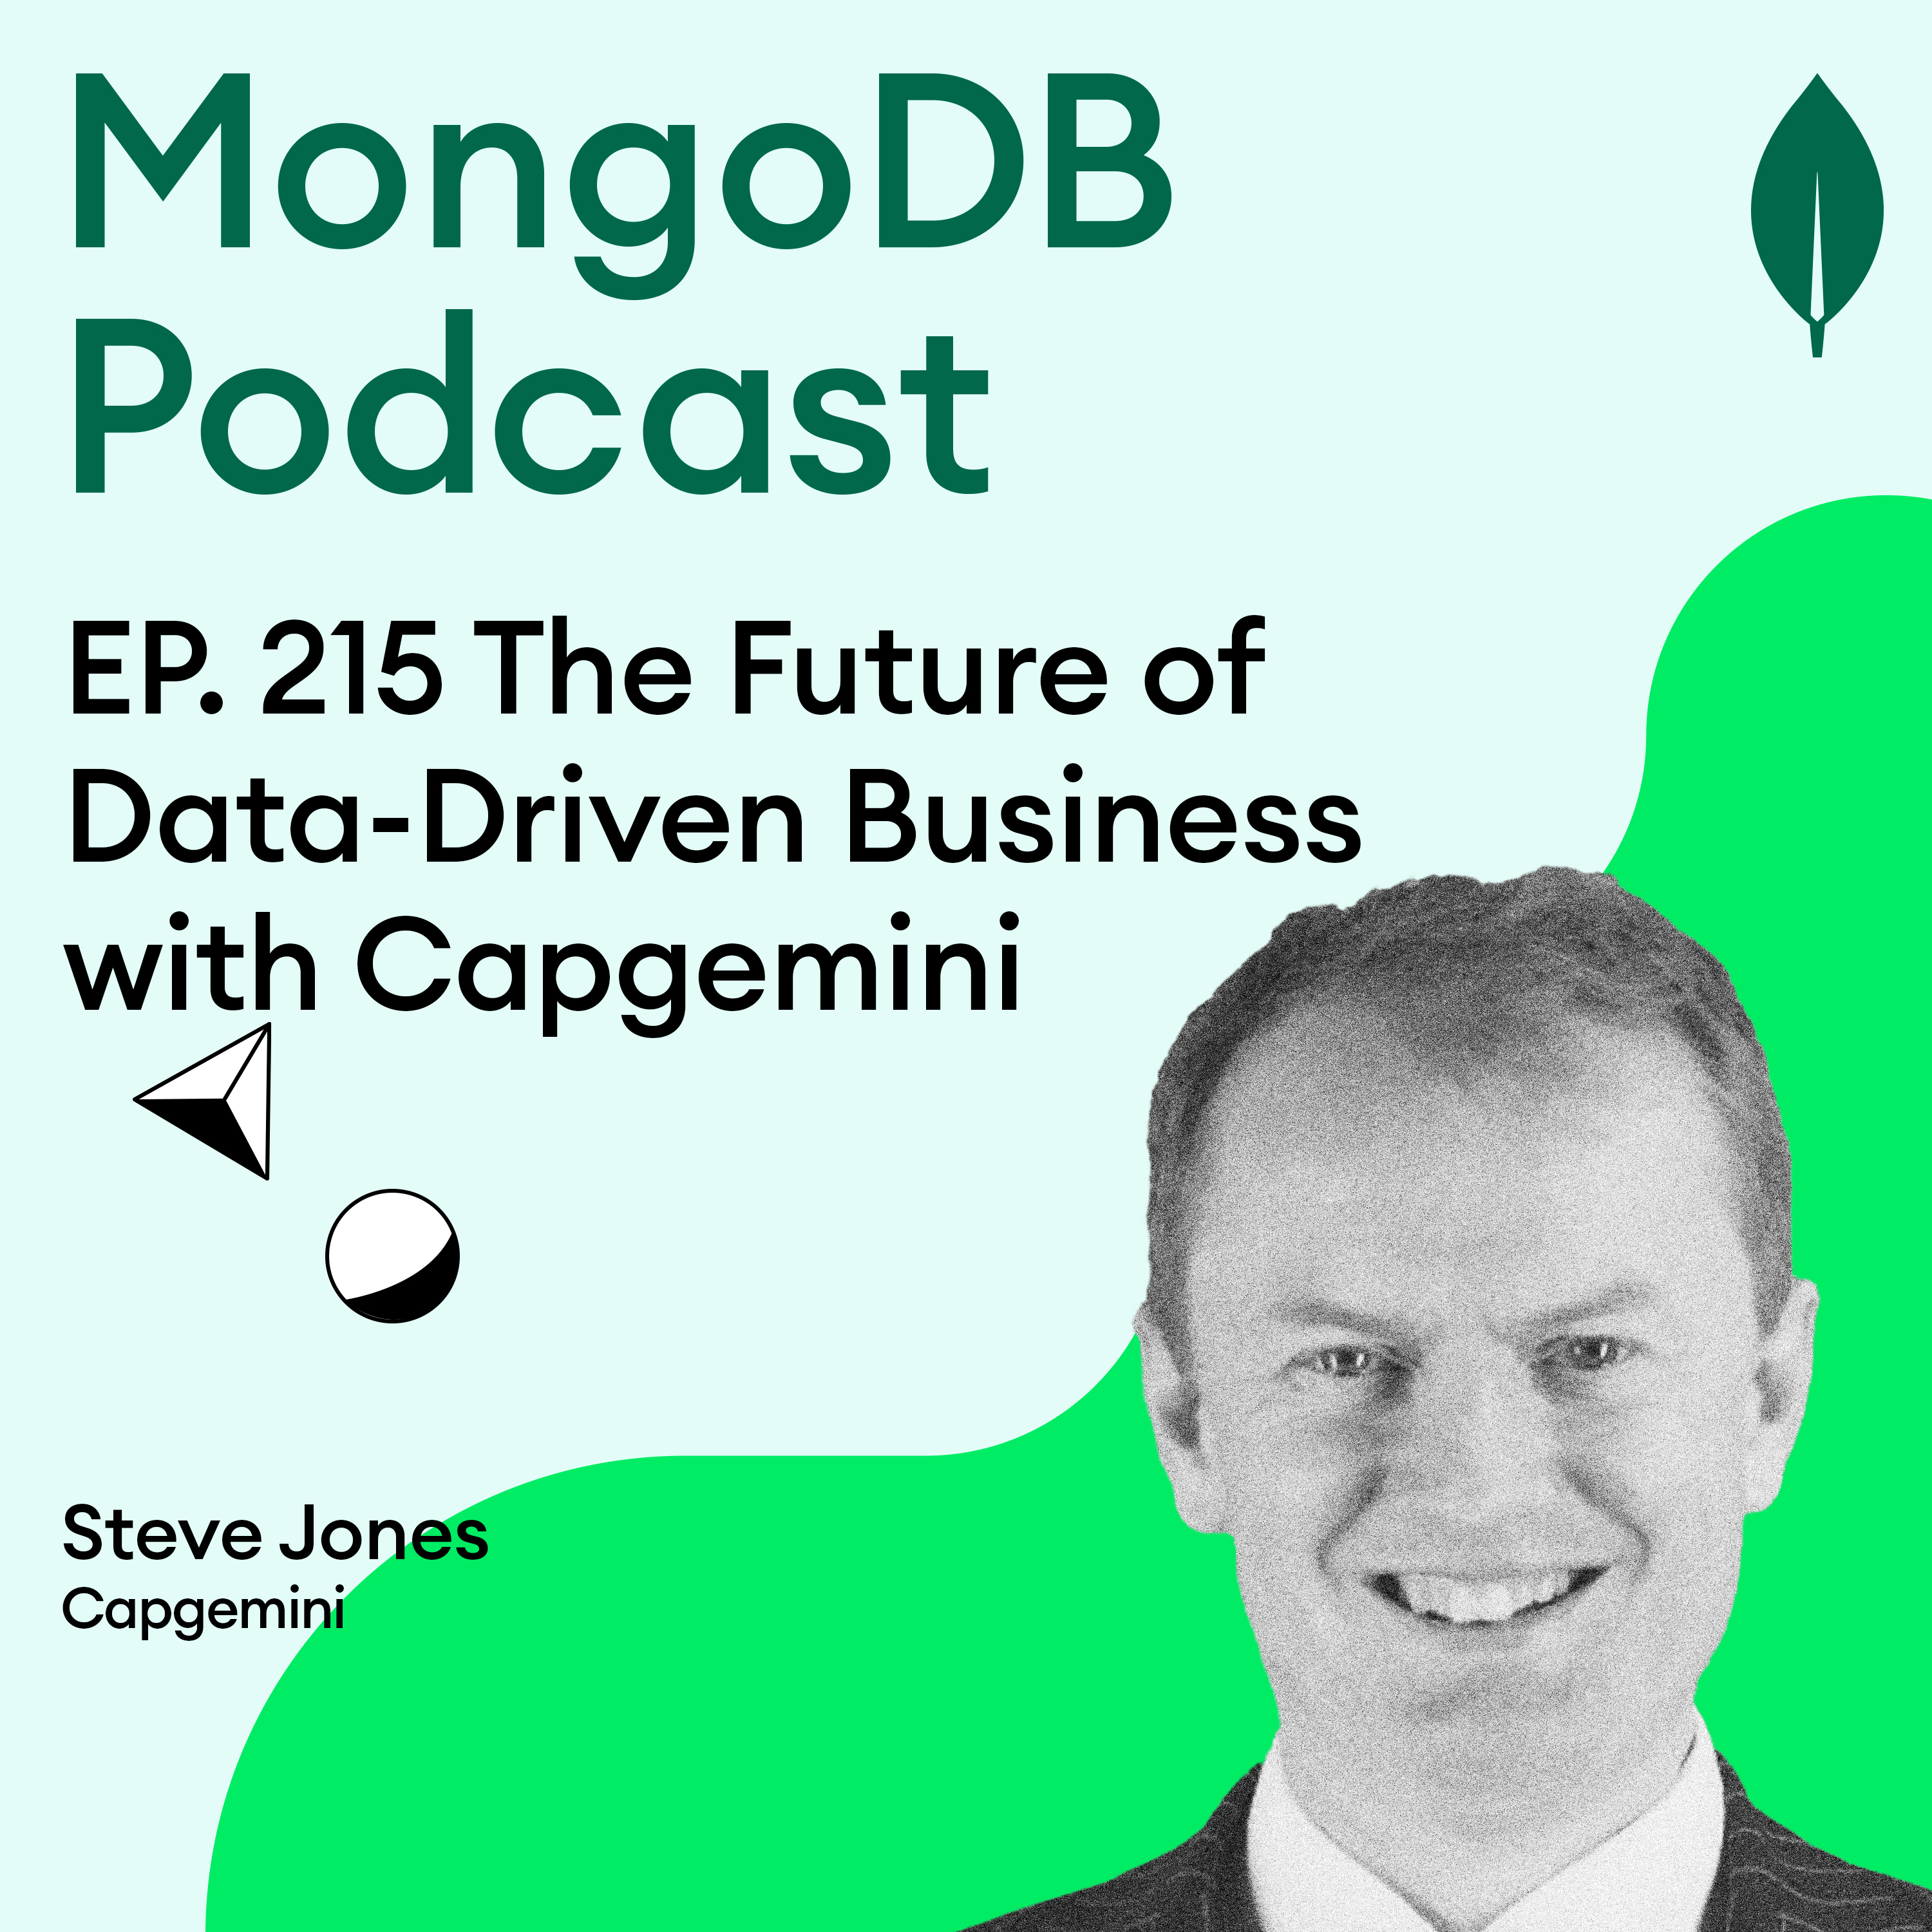 EP. 215 The Future of Data-Driven Business with Capgemini